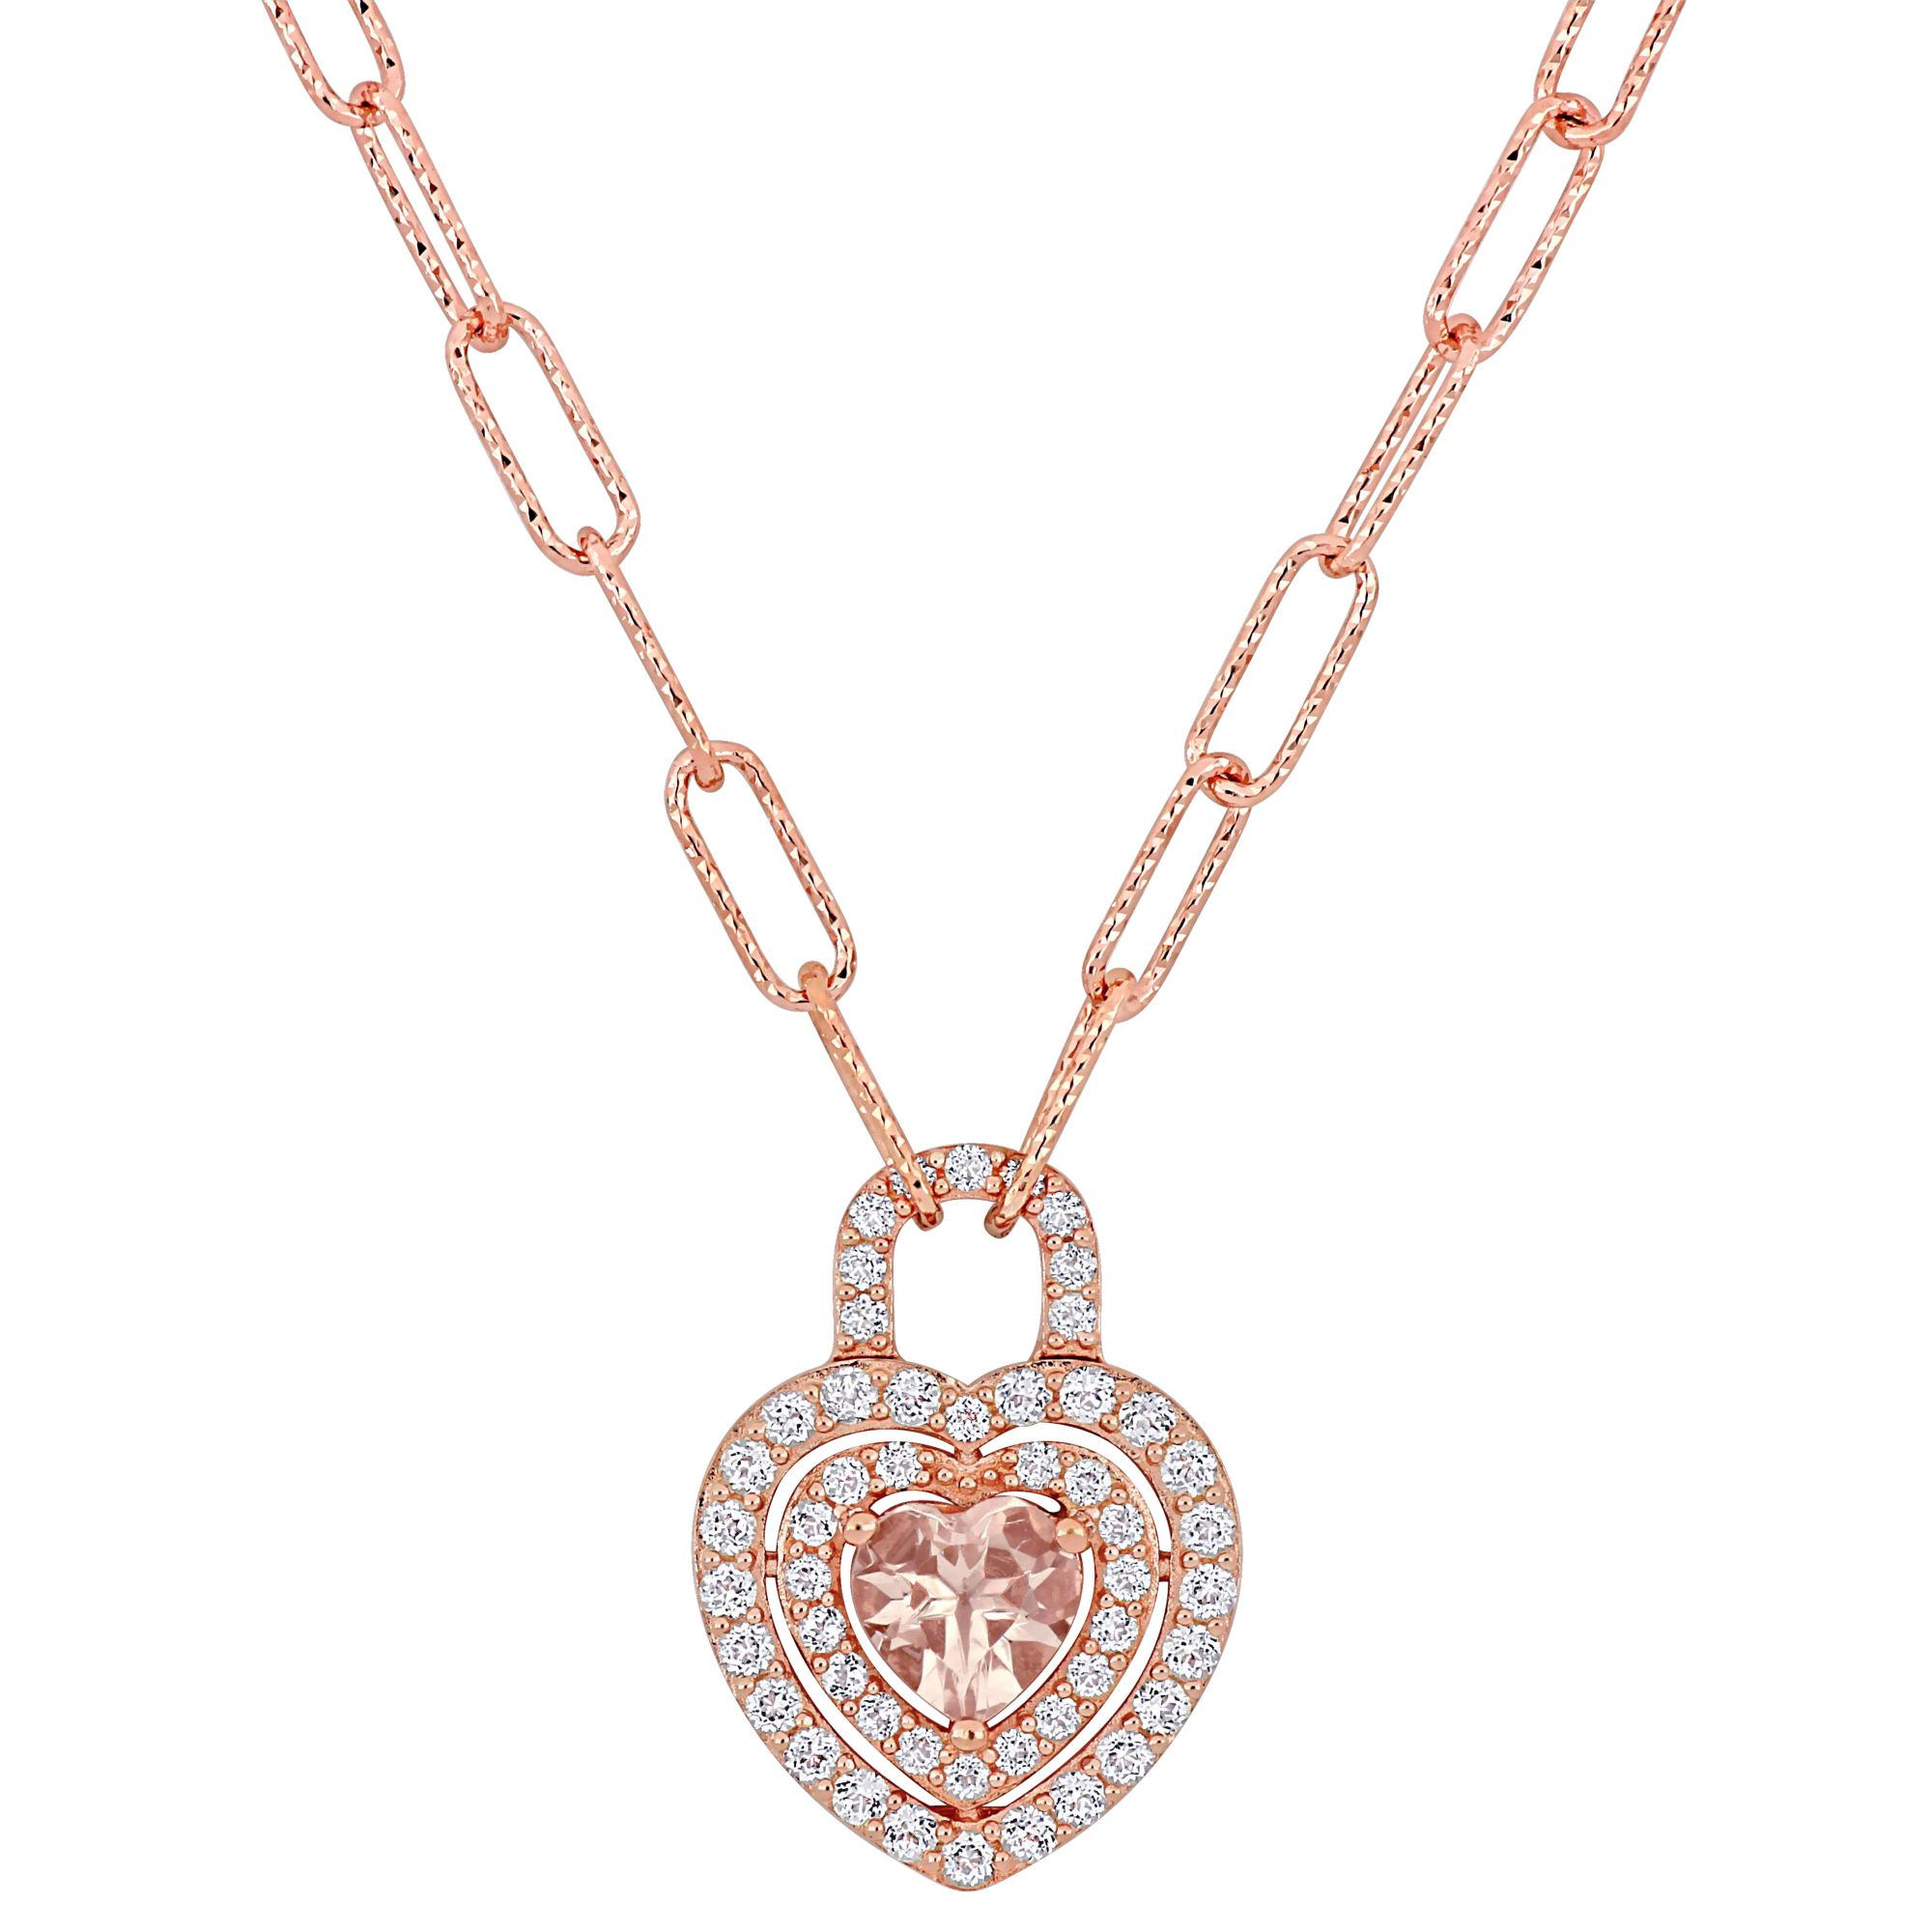 1.62 ct. t.g.w Morganite and White Topaz Halo Heart Necklace in 18k Rose Gold Plated Sterling Silver